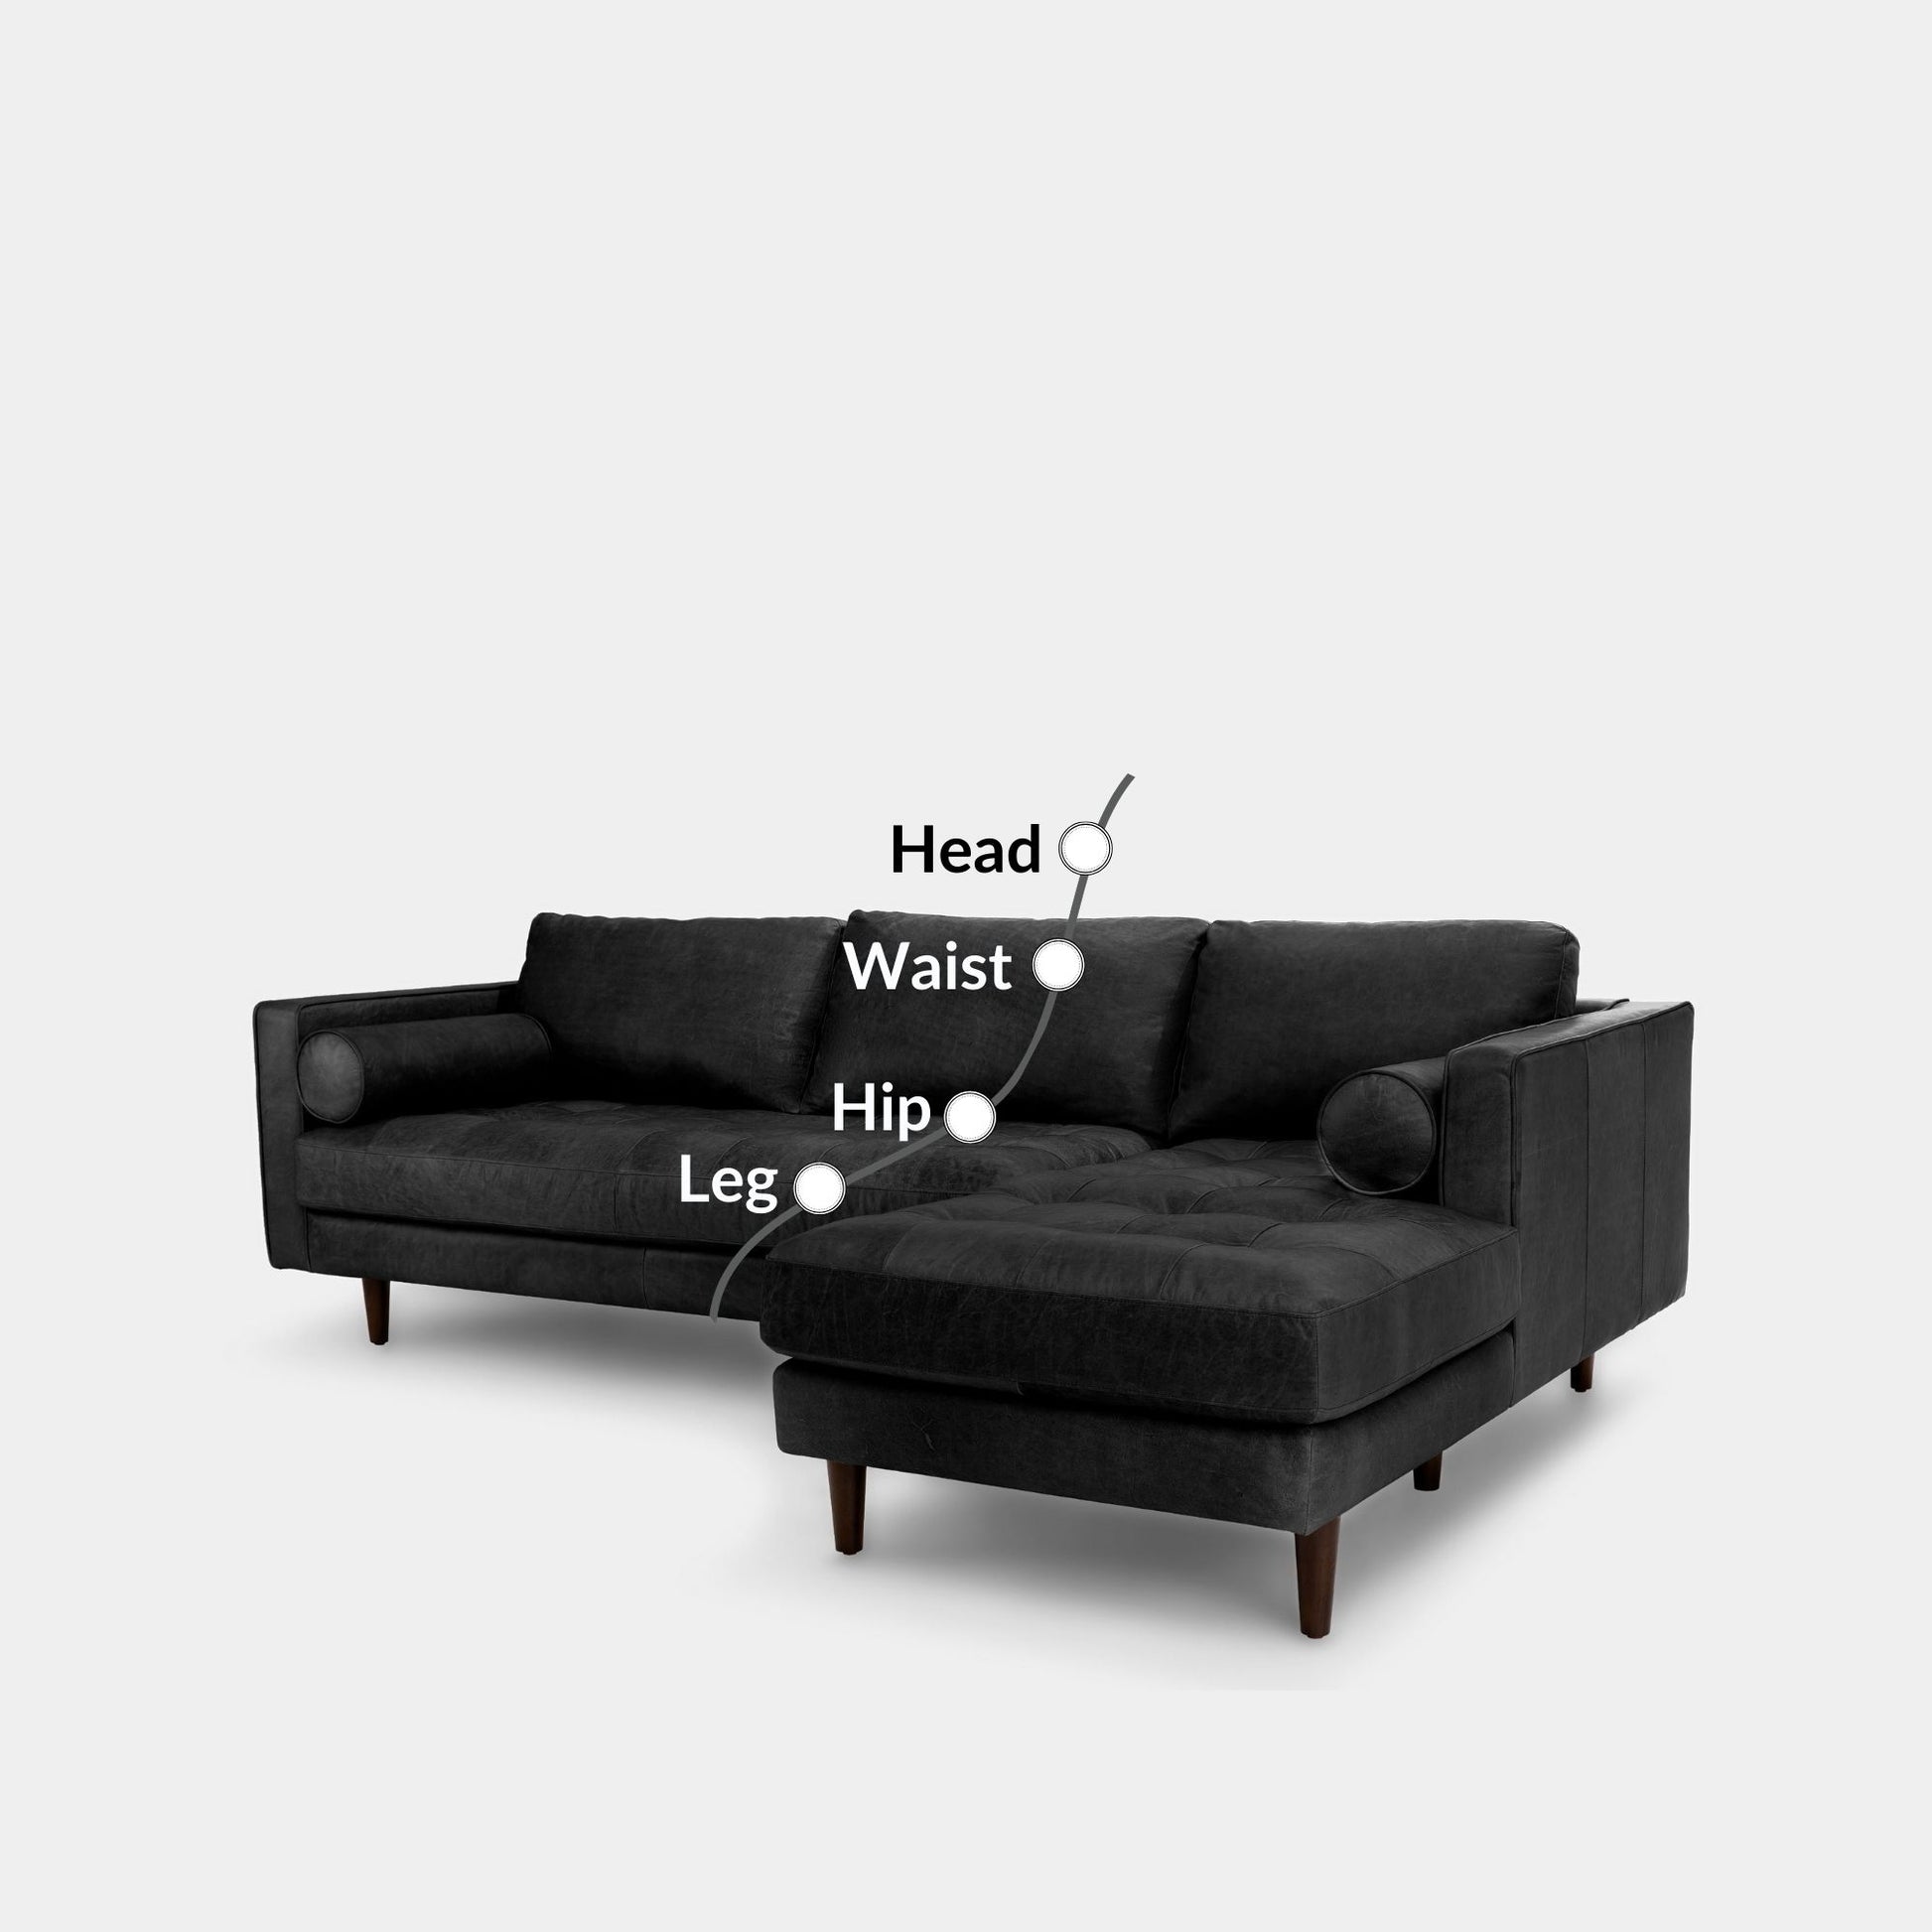 Castle leather sectional sofa right black